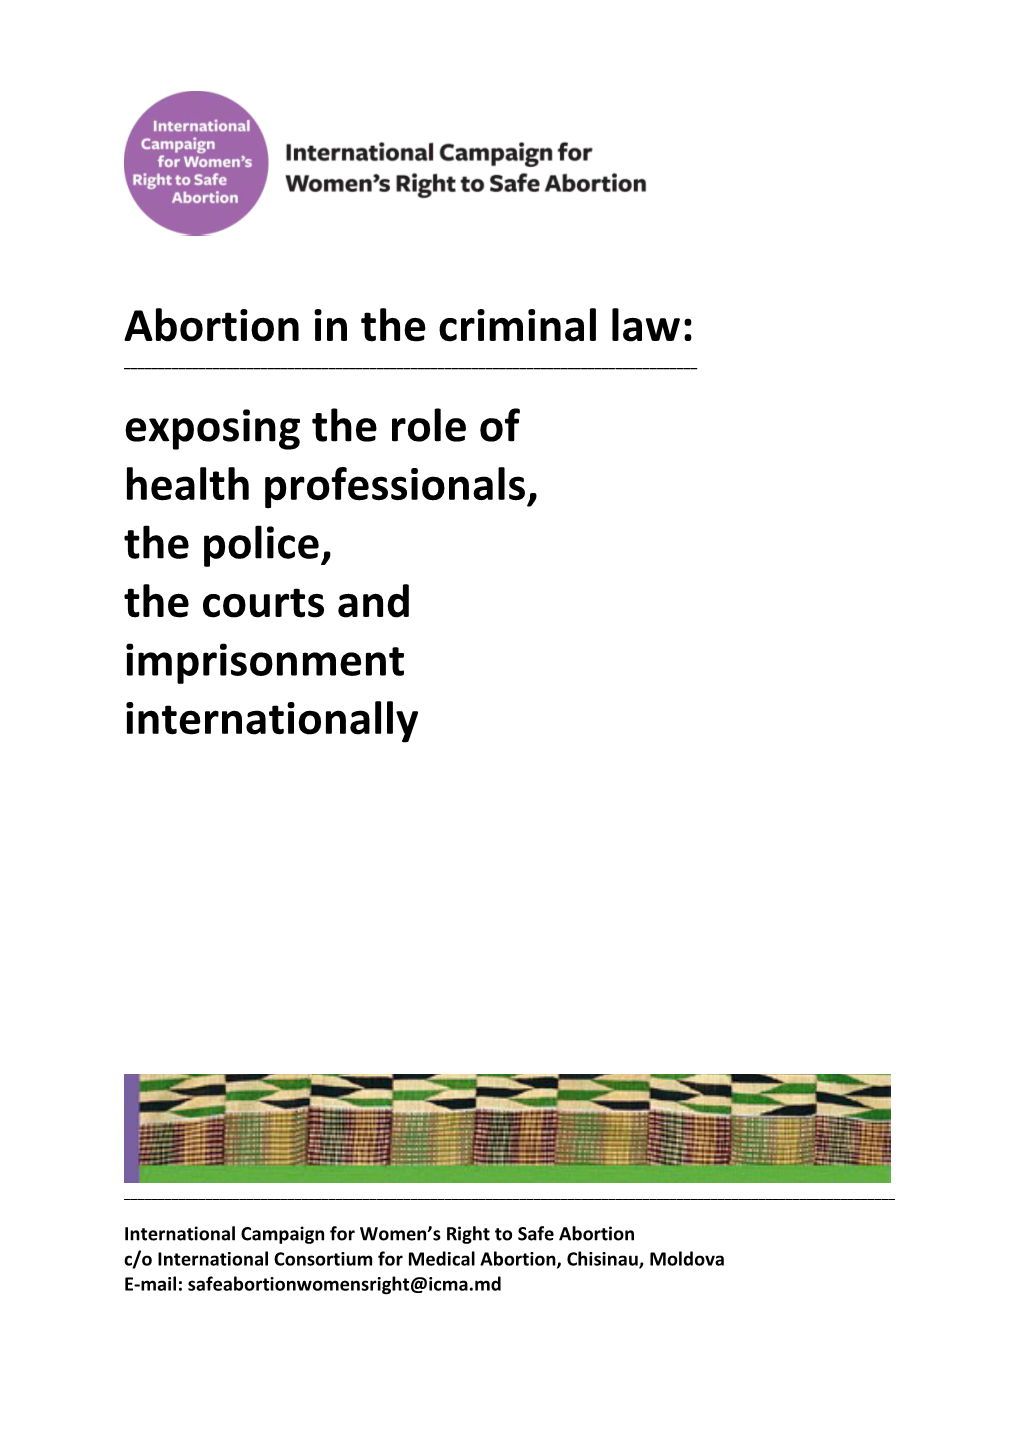 Abortion in the Criminal Law: ______Exposing the Role of Health Professionals, the Police, the Courts and Imprisonment Internationally